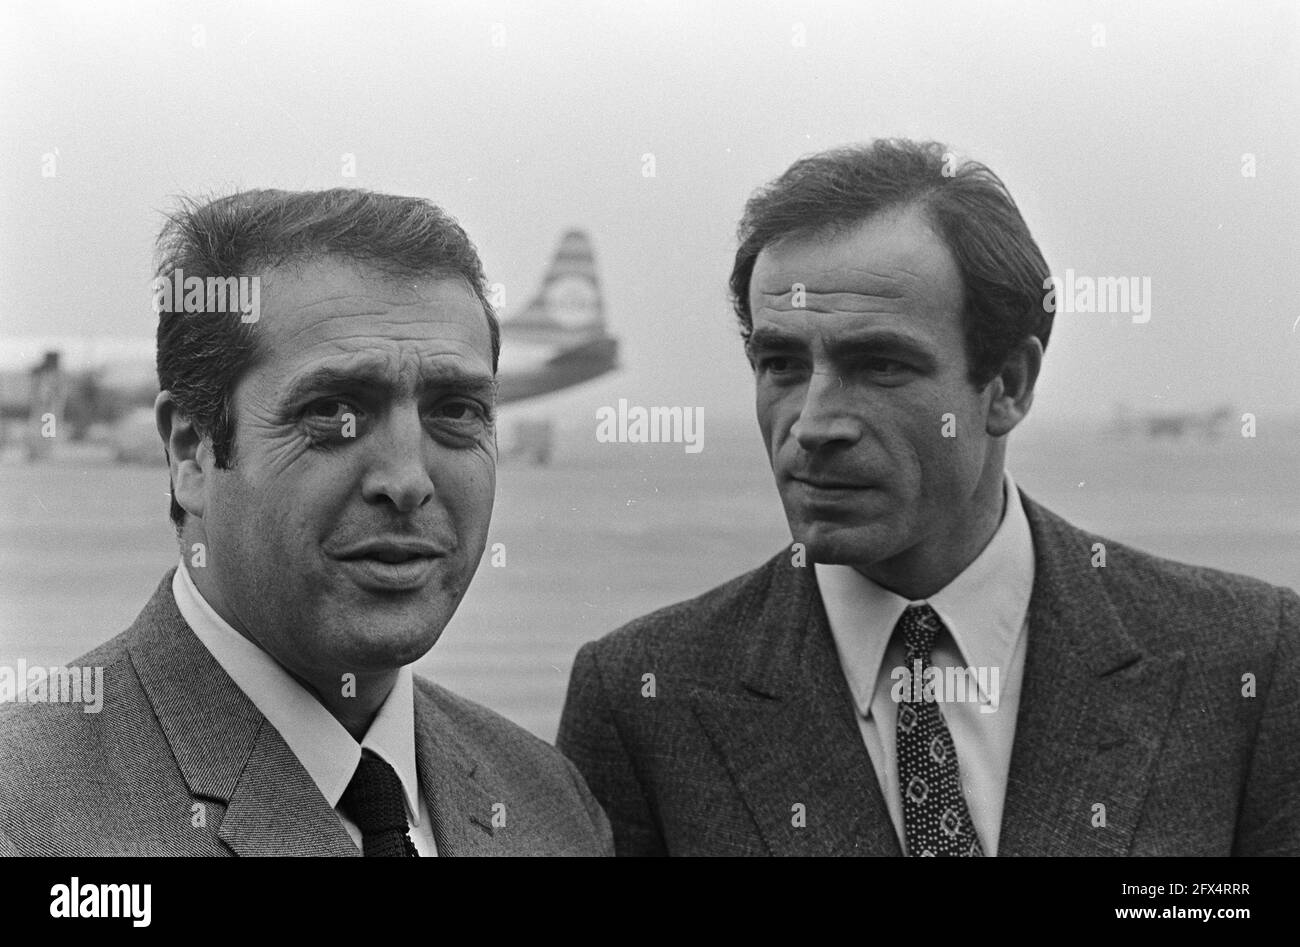 Arrival of director George Lautner (left) and Venantino Venantini (movie star) at Schiphol Airport, February 2, 1966, FILMSTERREN, Directors, Arrivals, The Netherlands, 20th century press agency photo, news to remember, documentary, historic photography 1945-1990, visual stories, human history of the Twentieth Century, capturing moments in time Stock Photo